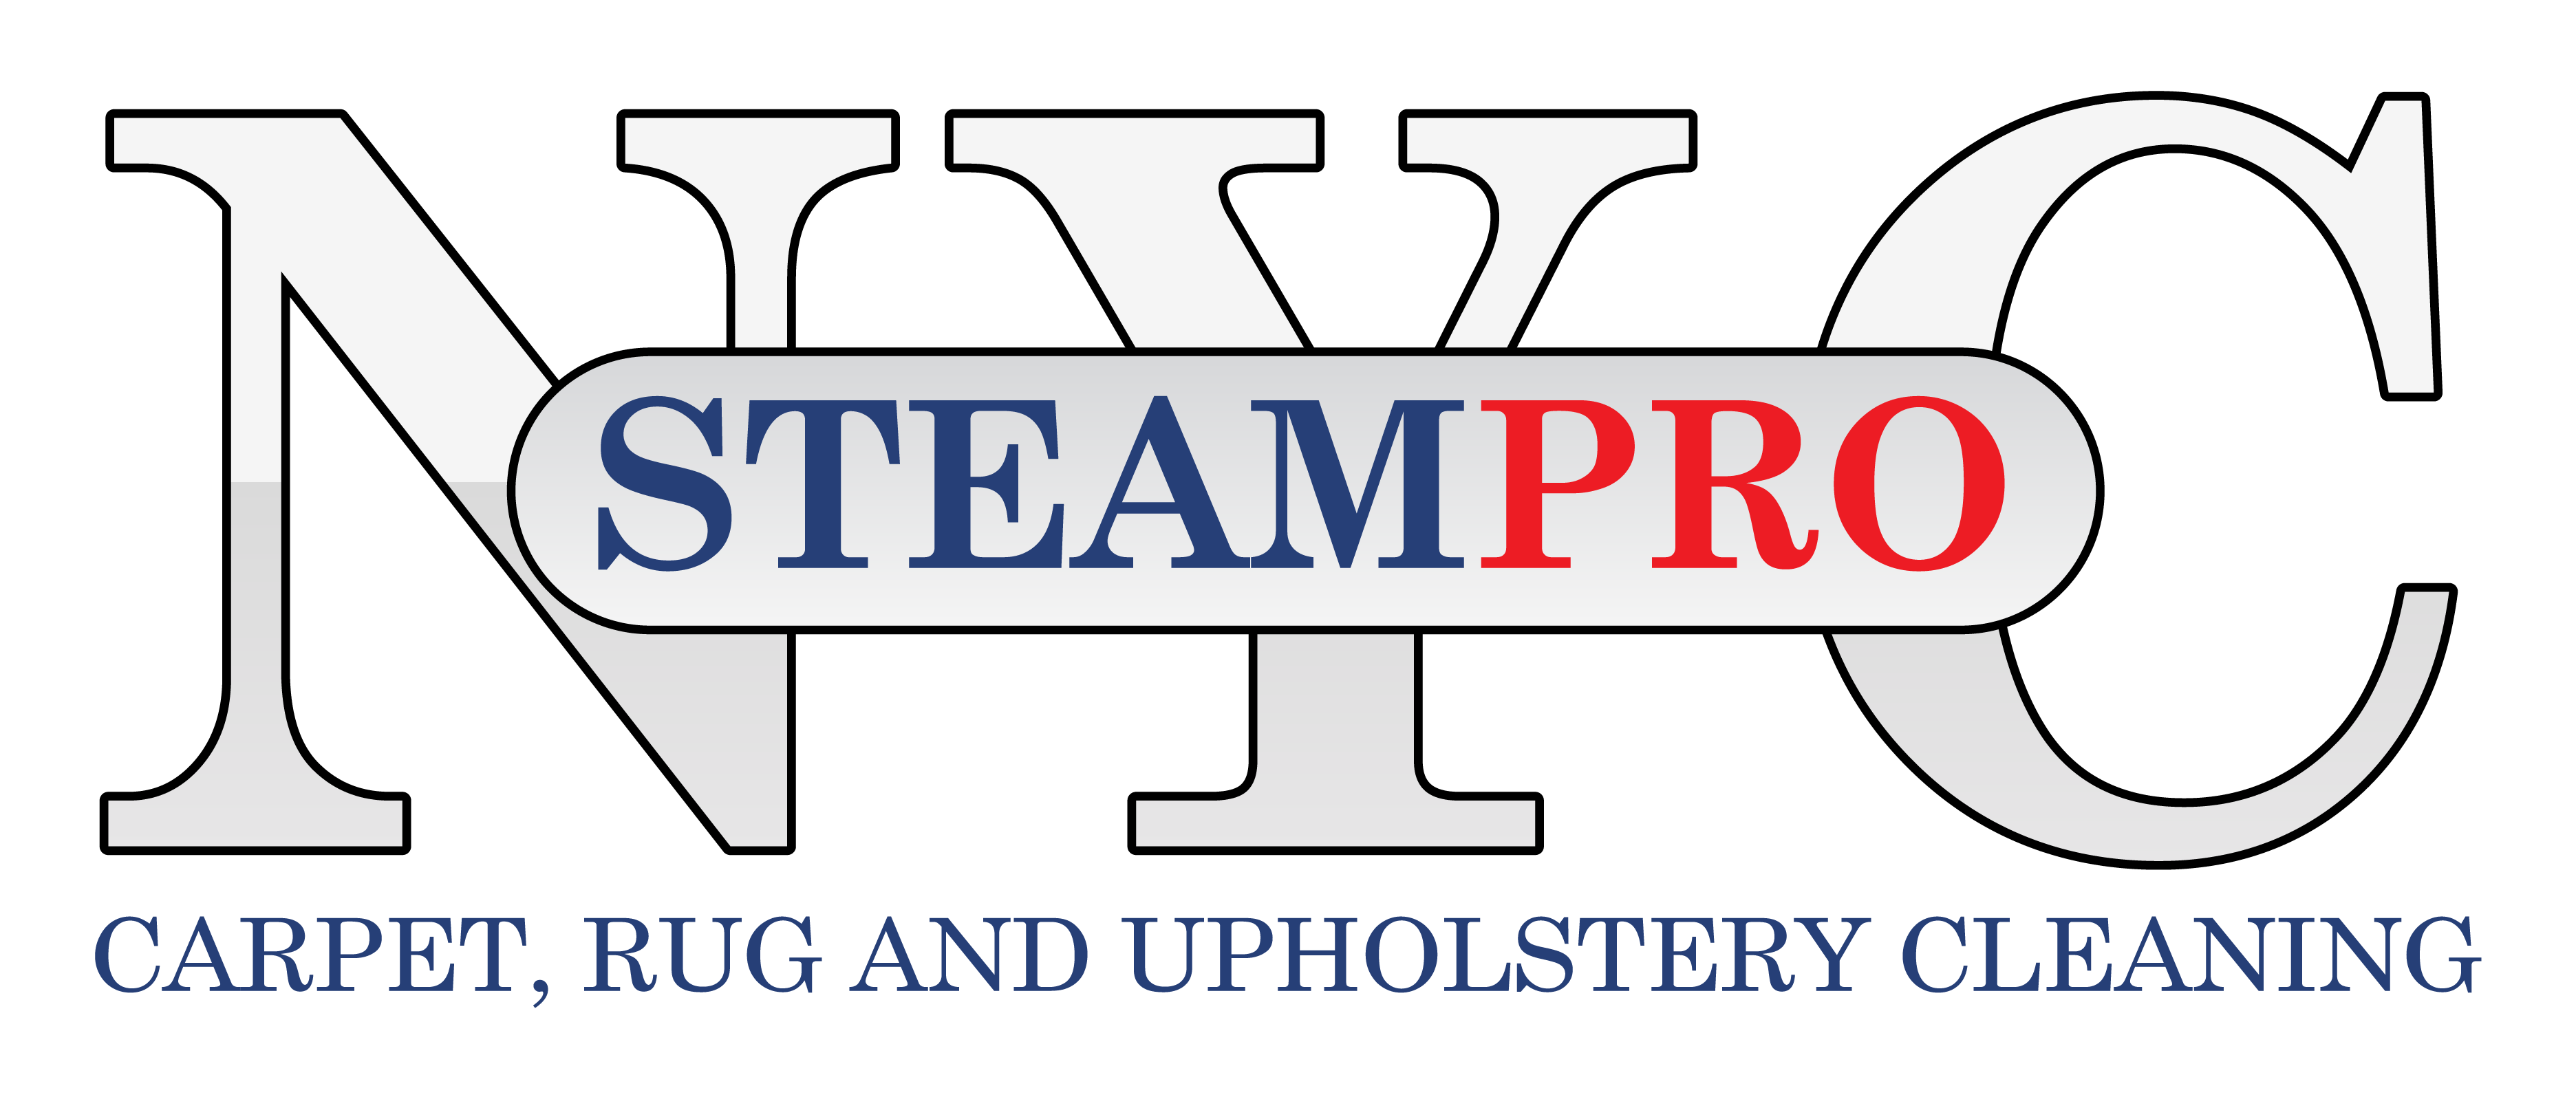 Steam Pro NYC Carpet, Rug and Upholstery Cleaning